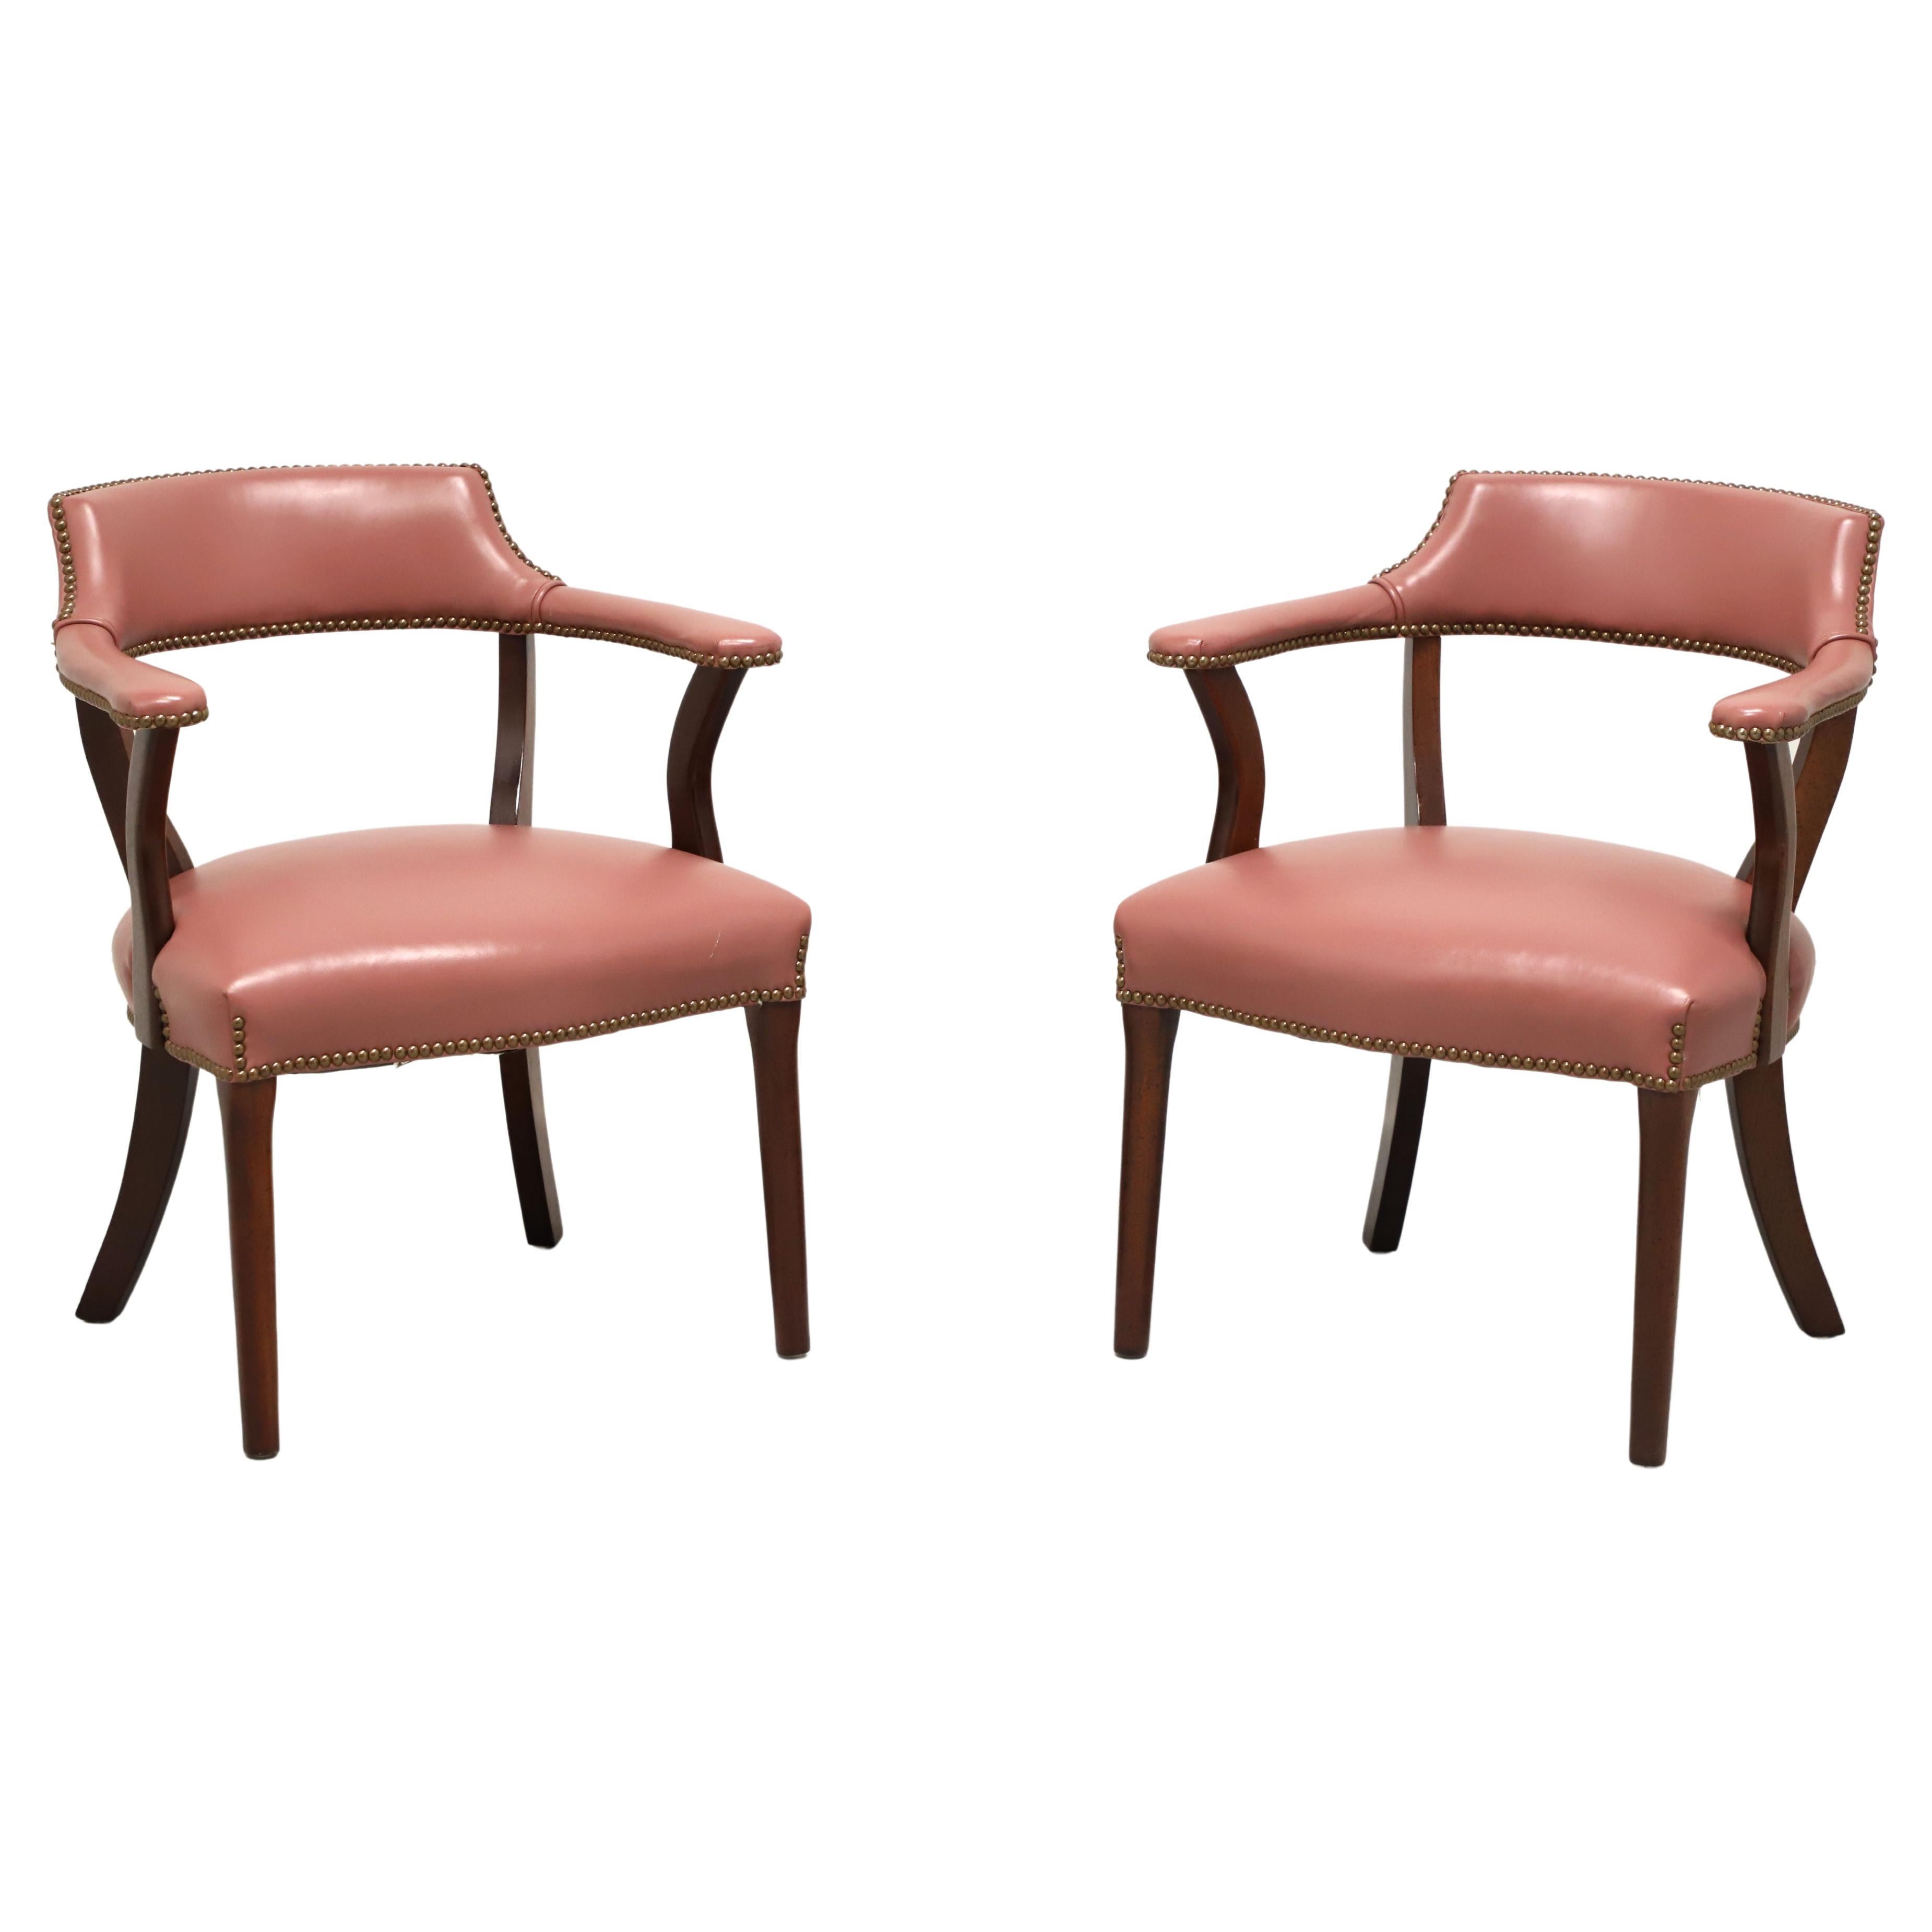 CLASSIC LEATHER Late 20th Century Mauve Leather Game Armchairs - Pair